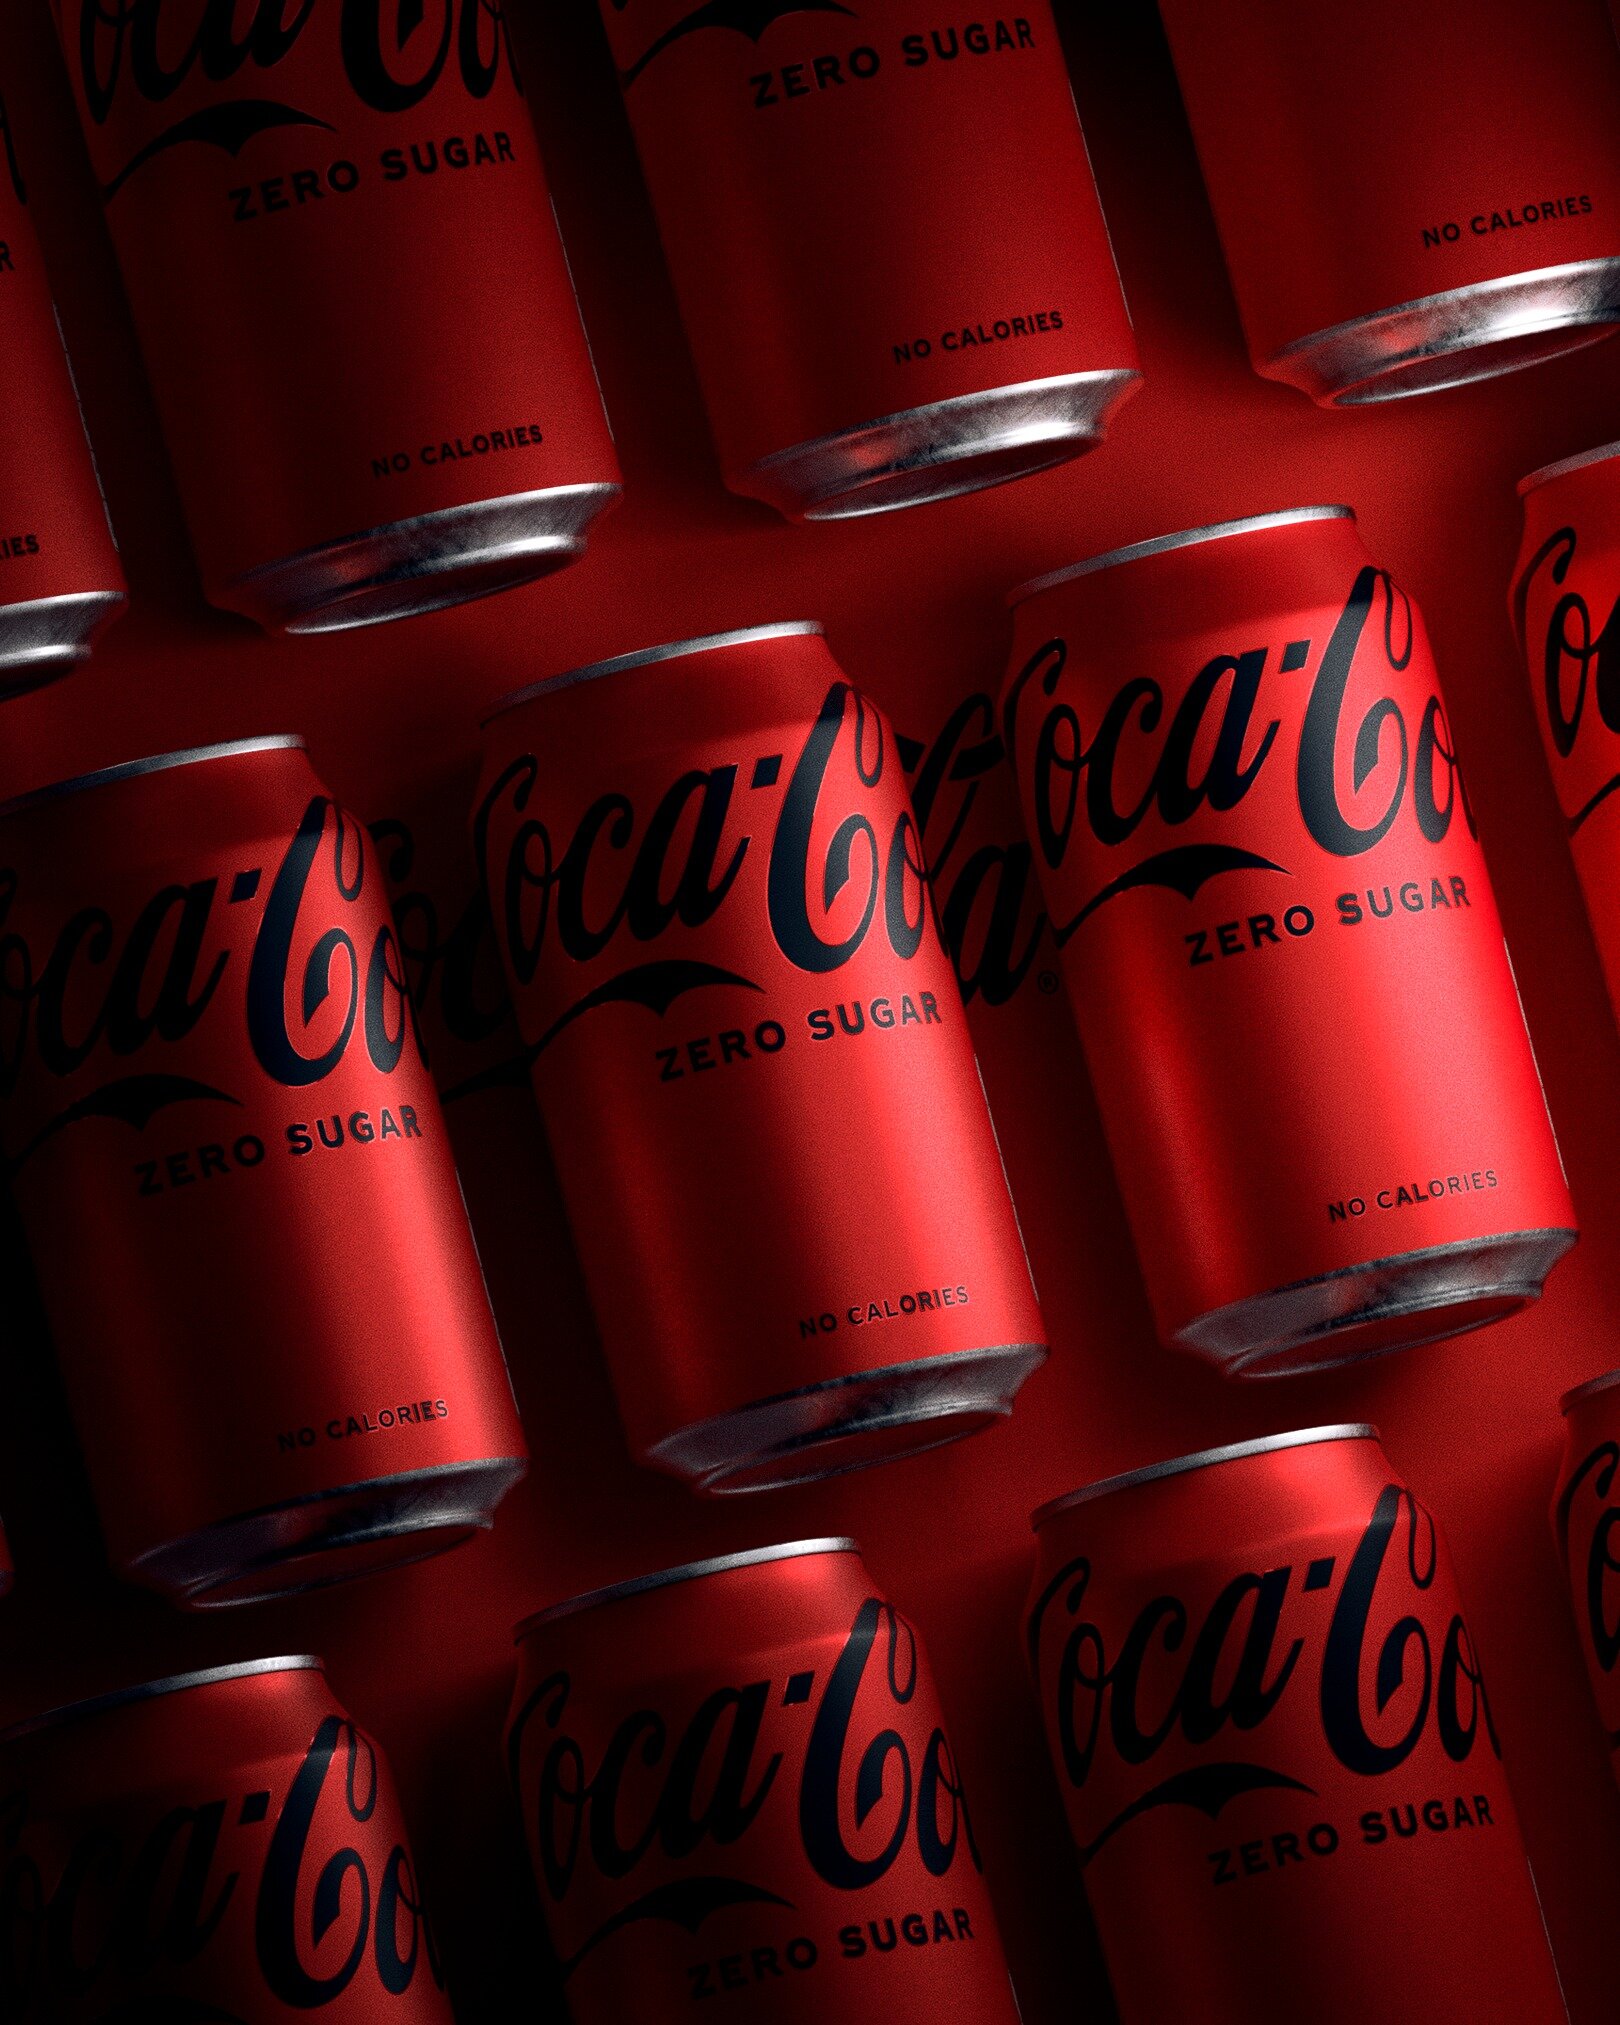 3D Product visualization BTS 🔴⚫- as seen in our newest 3D OOH campaign for @cocacoladk

#3dvisualization #3dproductdesign #render3d #cocacolazero @wavemakerdanmark WPP @wpp Wavemaker @cocacola #outofhome #bts